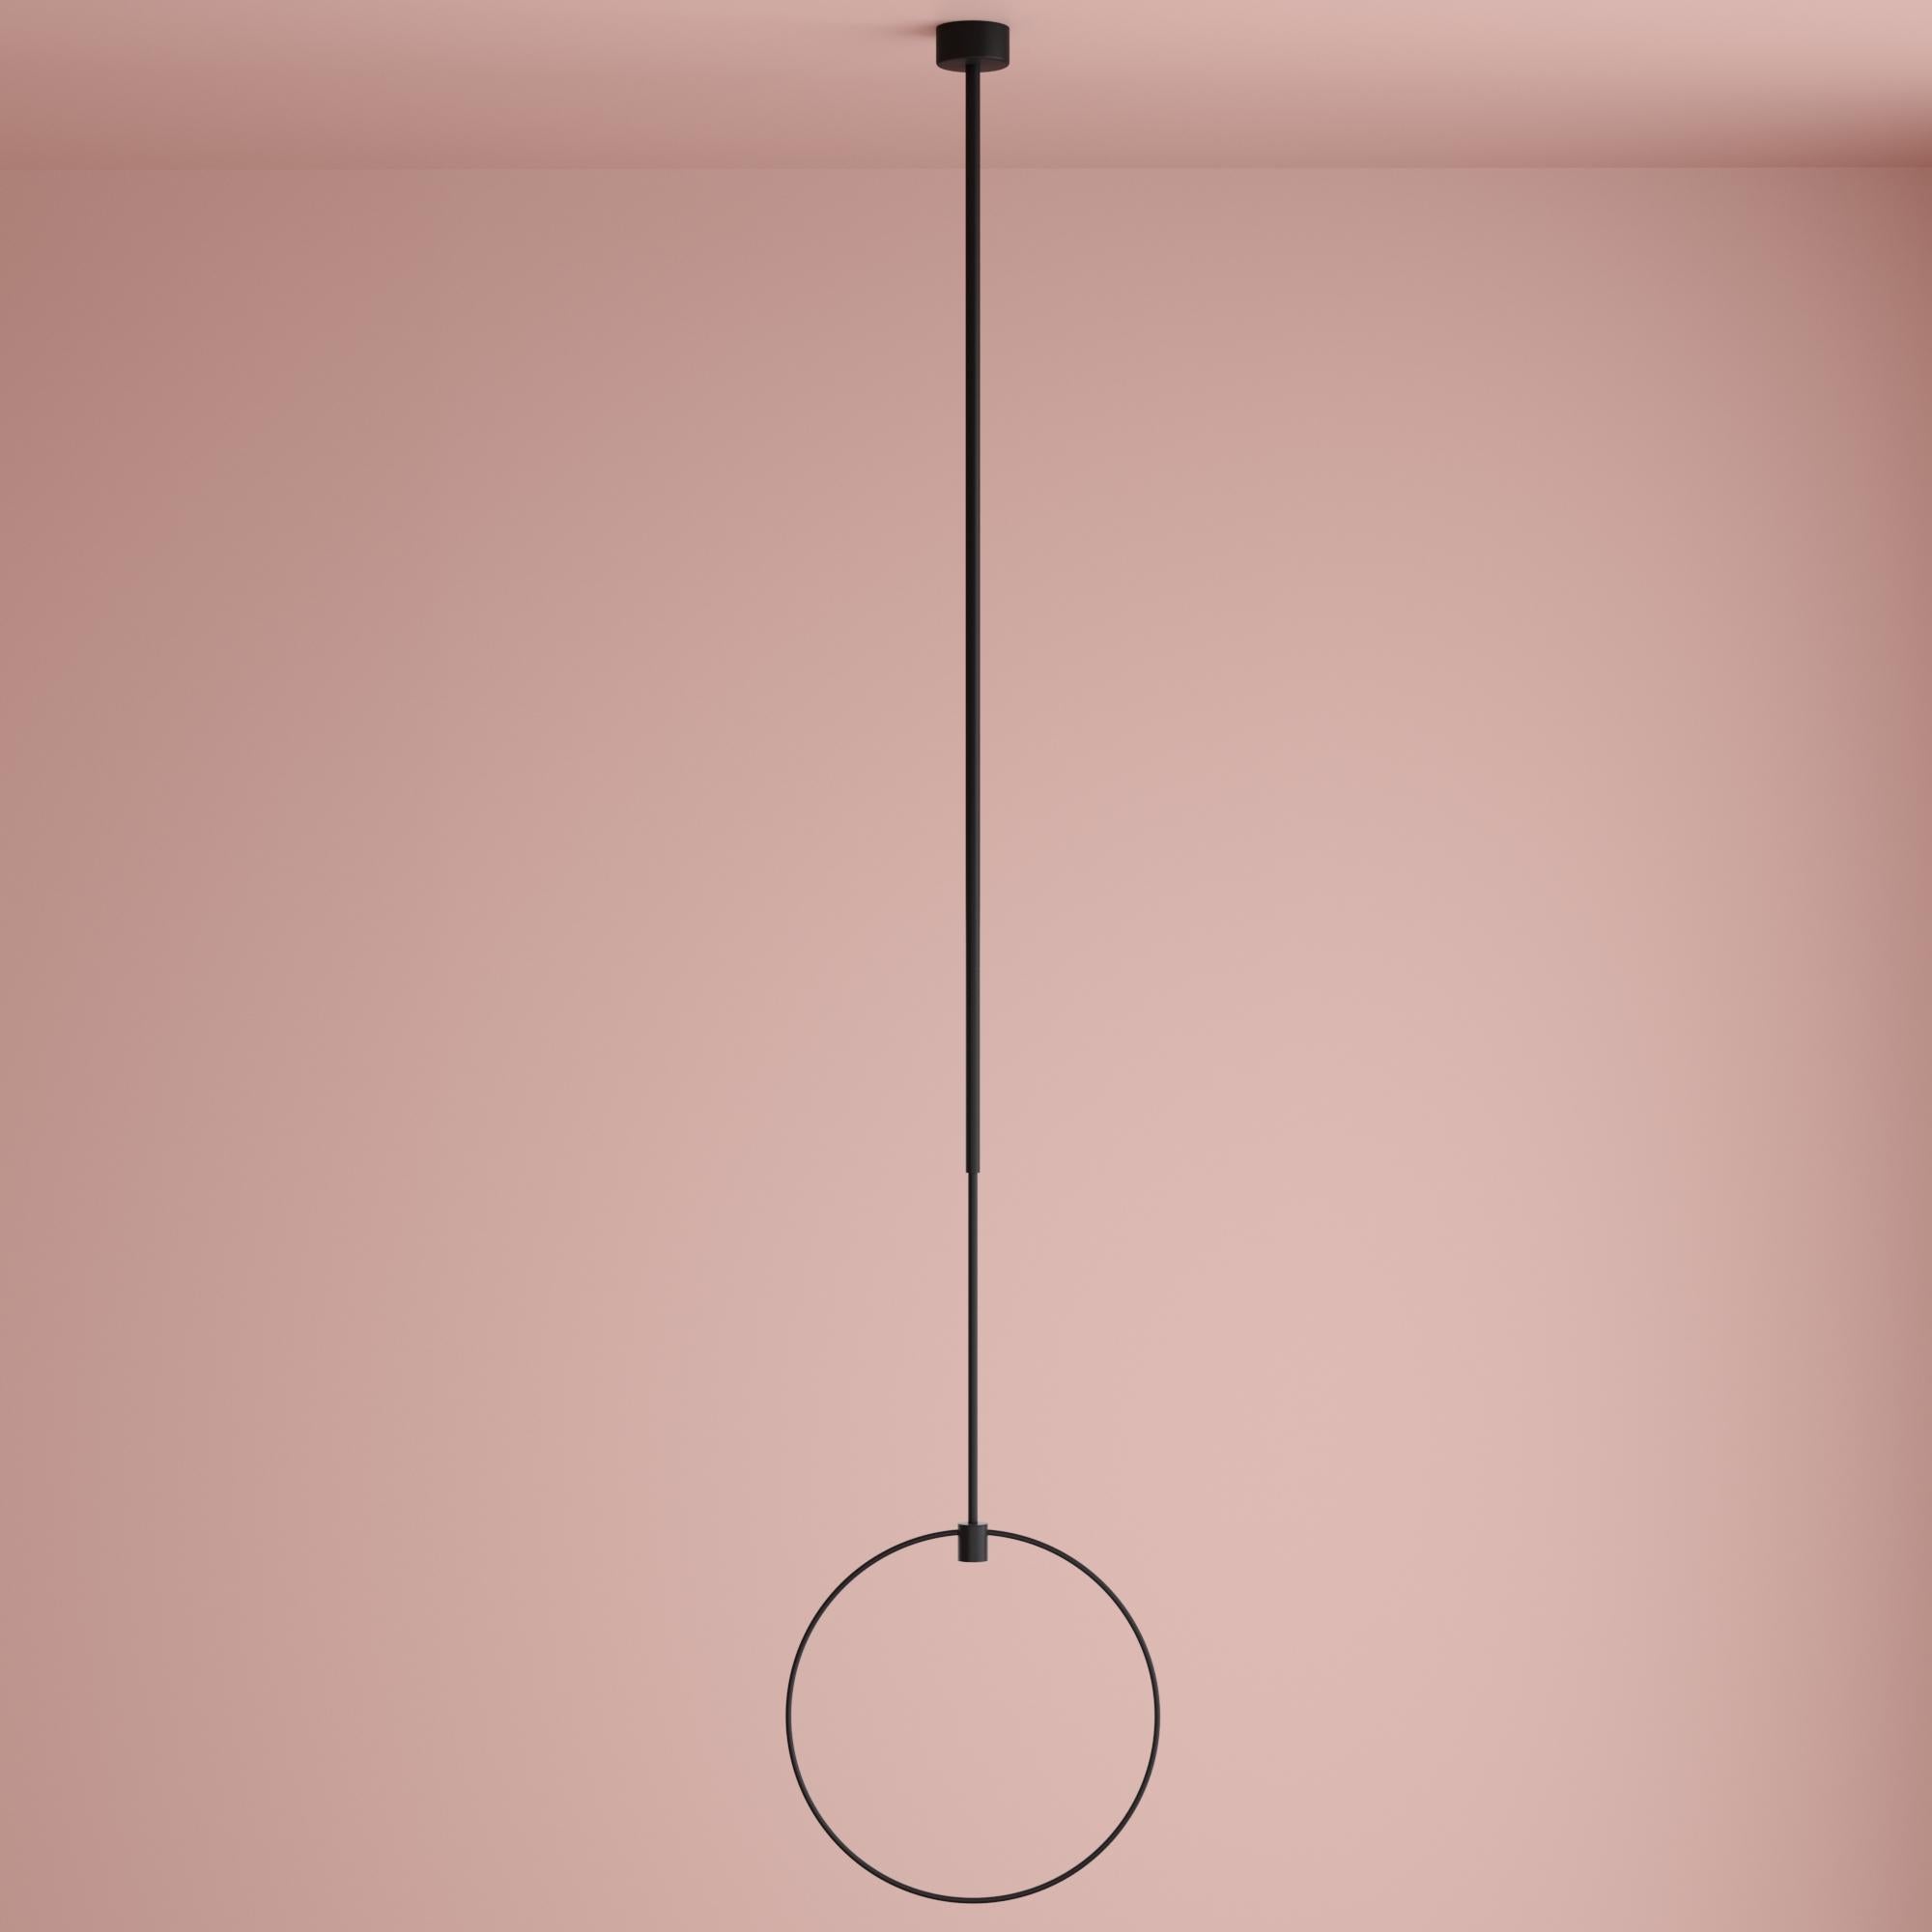 Holder

Category: Lighting
Type: Pendant, Chandelier 
Material: stainless steel
Overall dimensions: H 2100 mm / W 300 mm
Light source: LED 3W, 600 Lum, temperature 3000K or 4000K, 110-220V
Available in different colors according to RAL